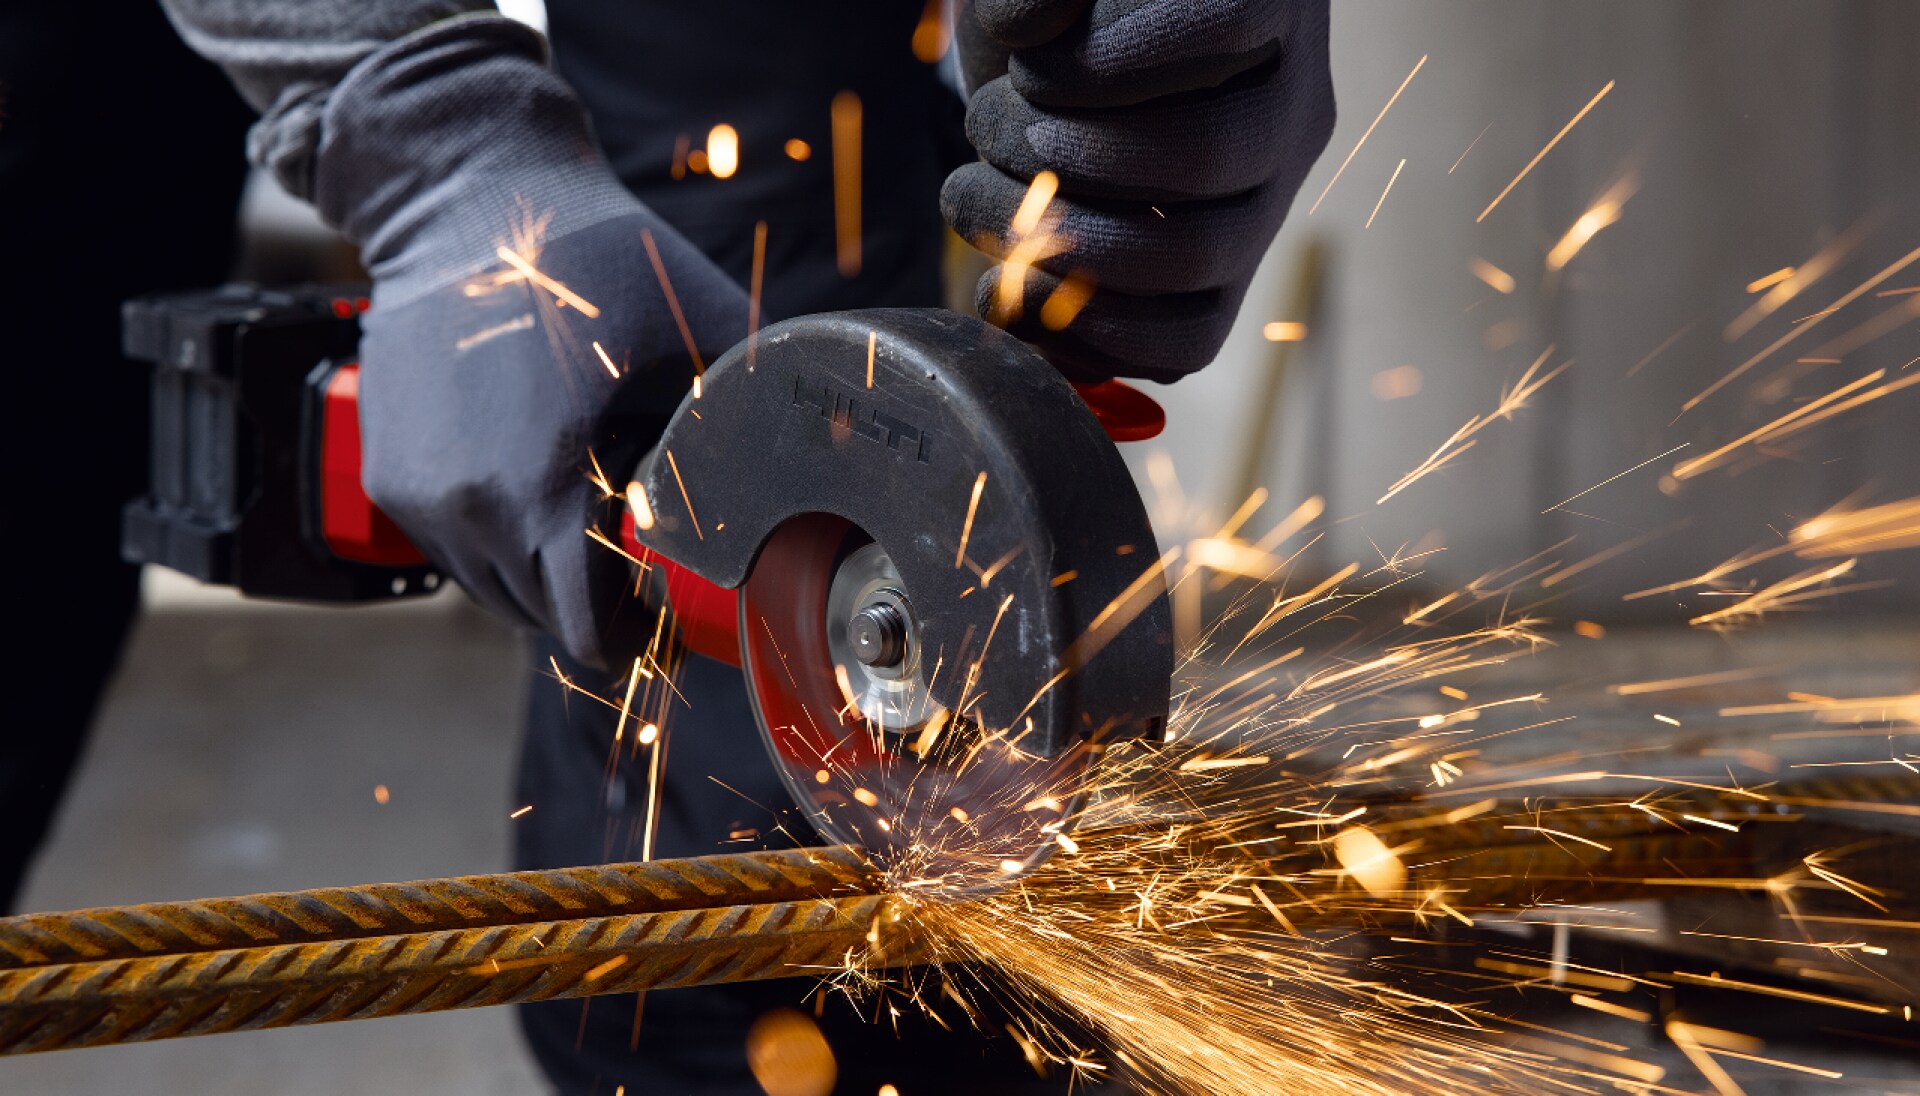 Worker cutting a rebar with an Angle Grinder causing sparks